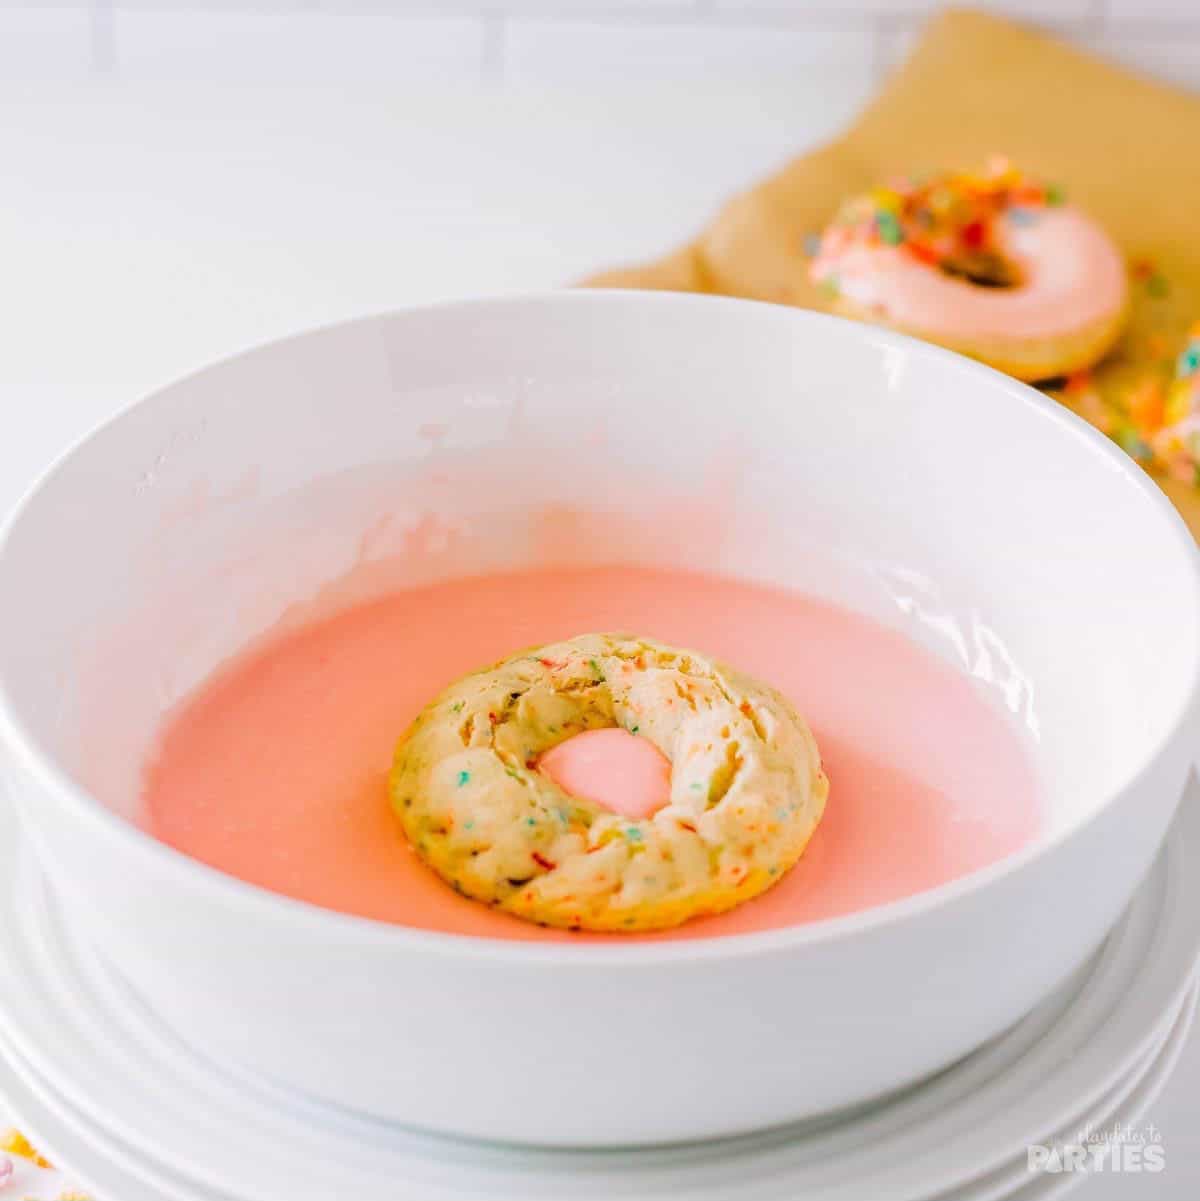 Dipping baked donuts in the strawberry glaze.